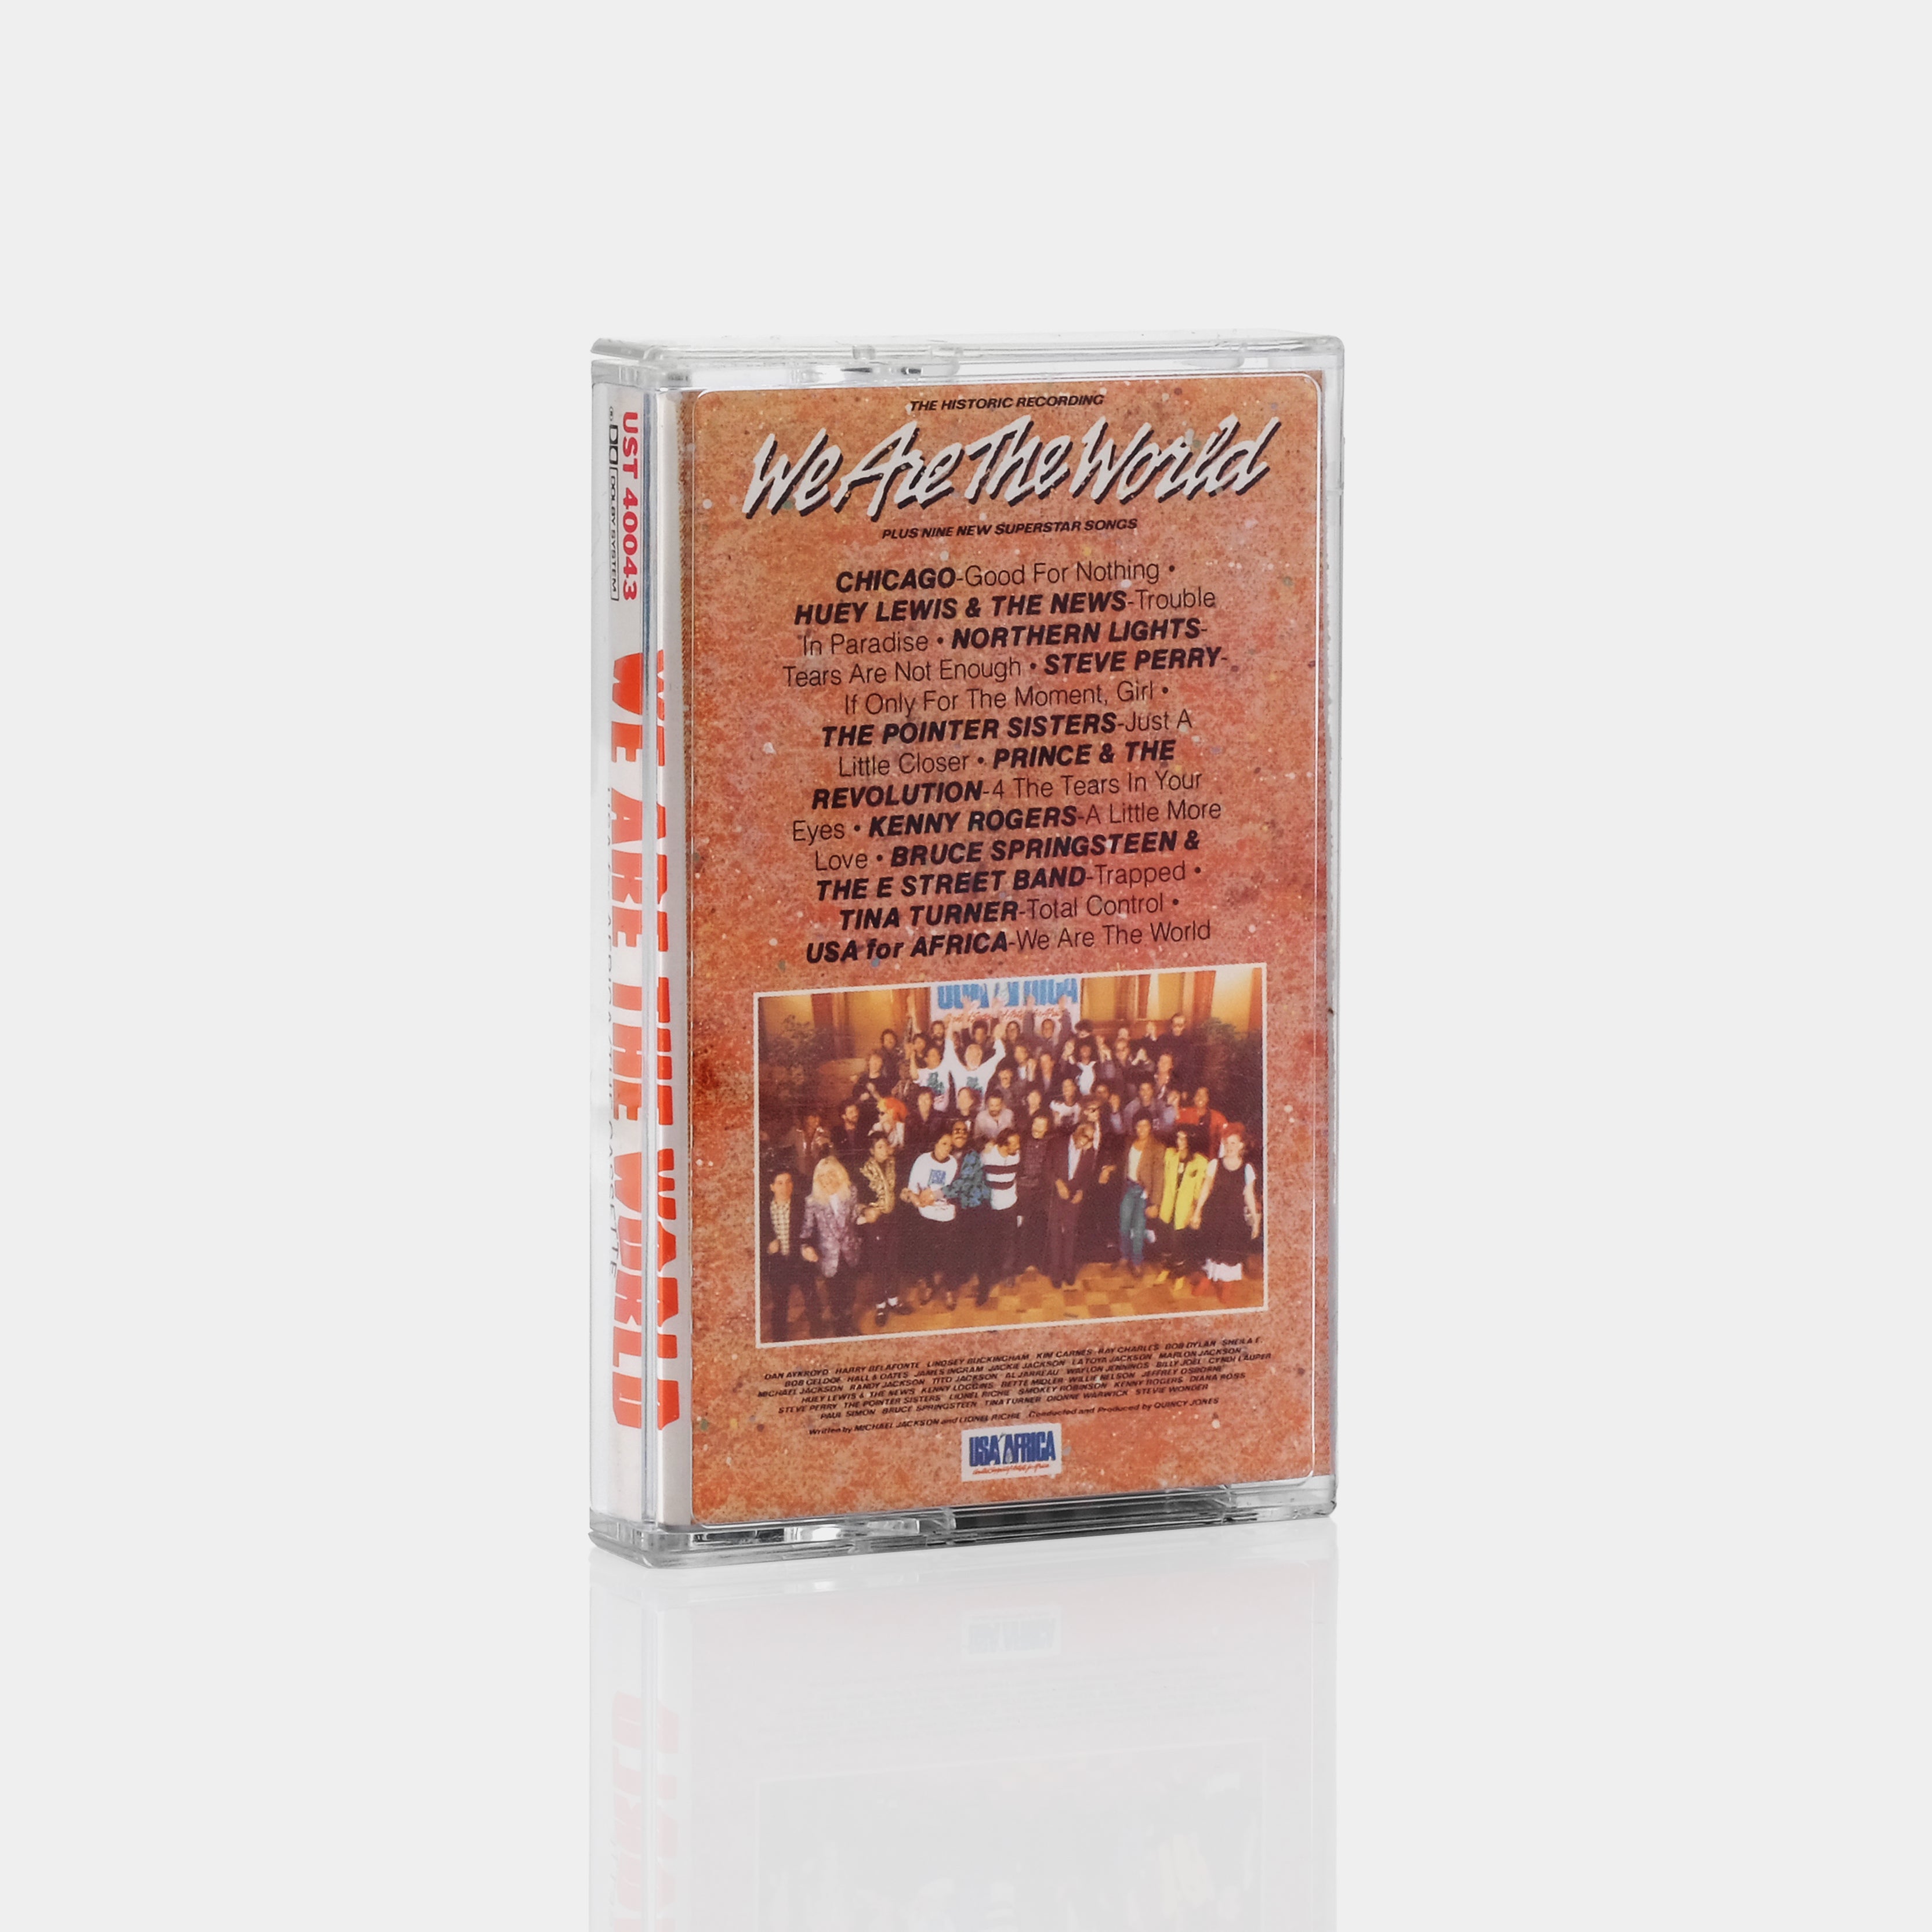 USA For Africa - We Are The World Cassette Tape